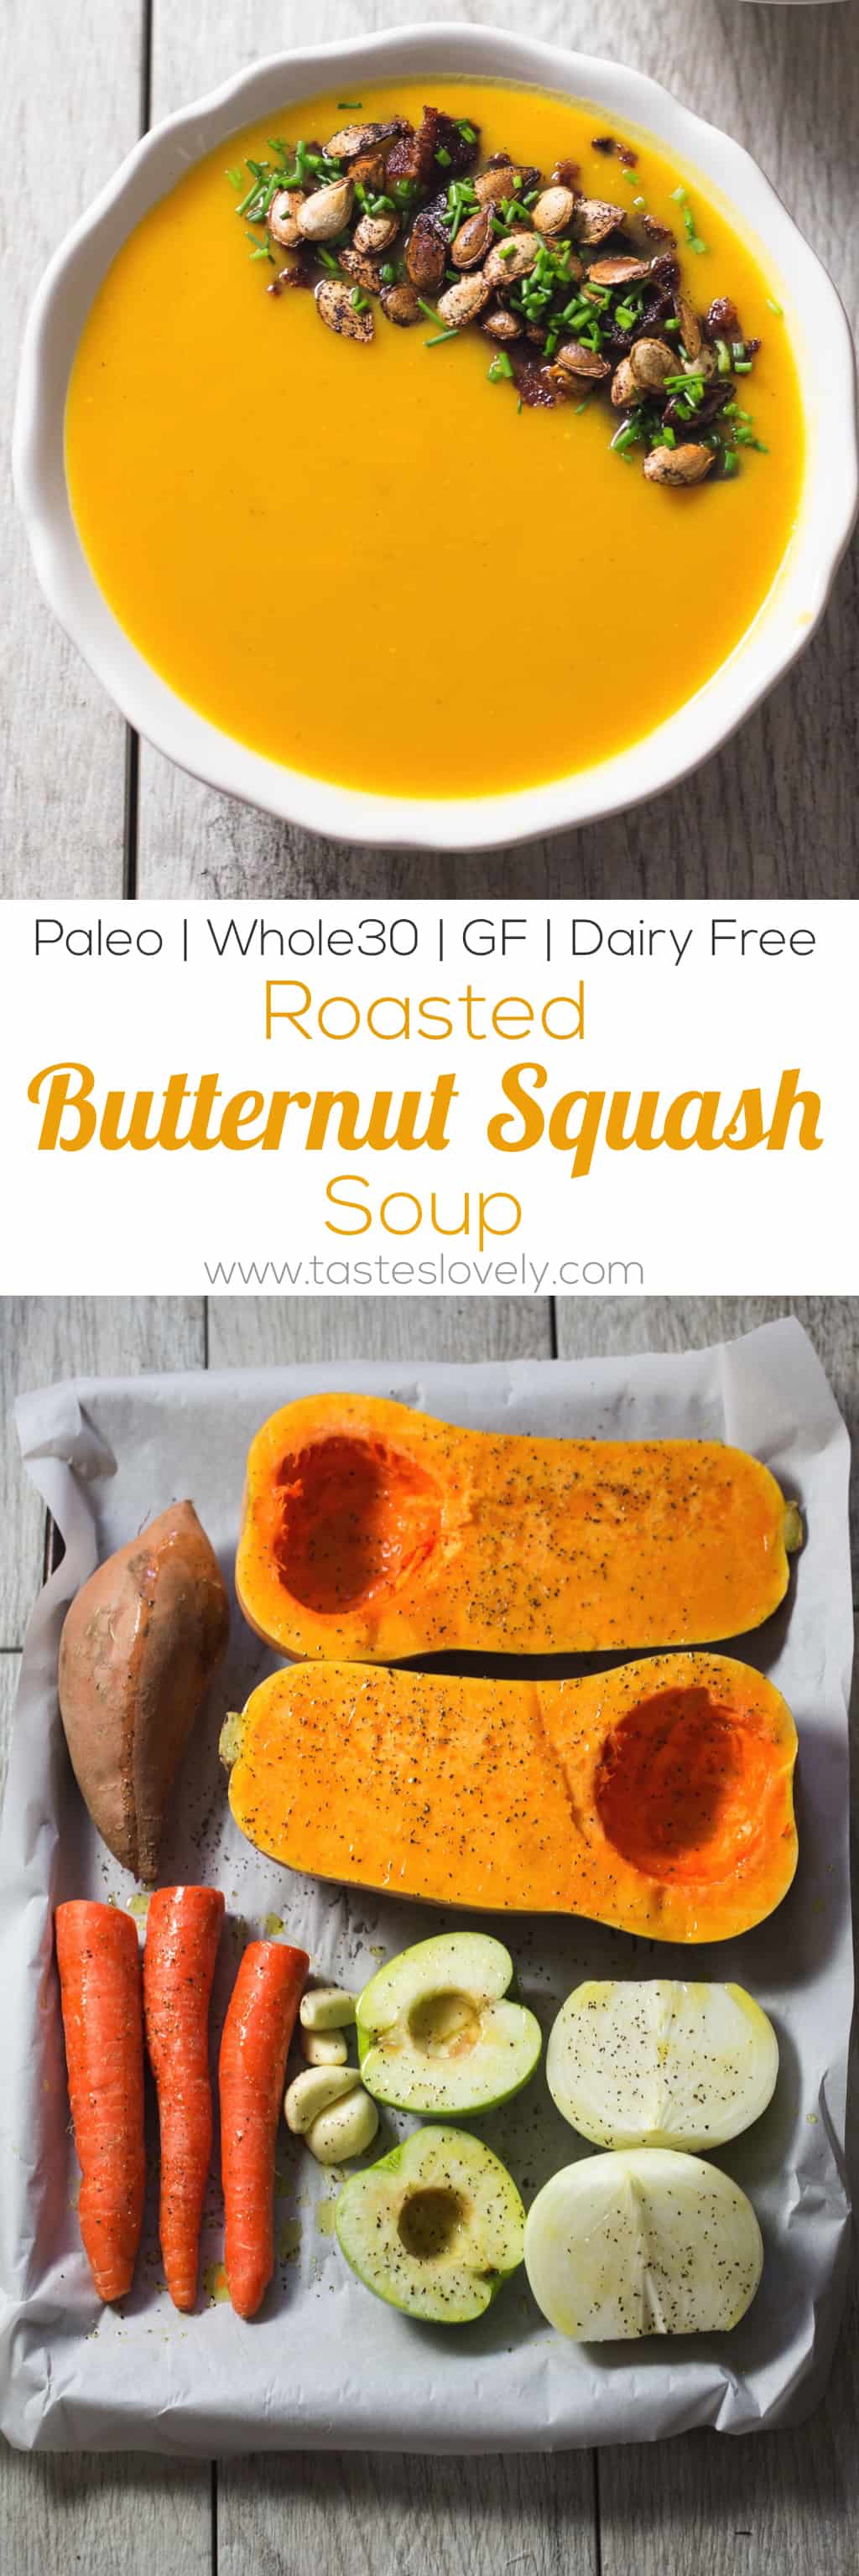 Paleo Roasted Butternut Squash Soup - the oven and your blender does all the work for you! Dairy free, gluten free, Whole30